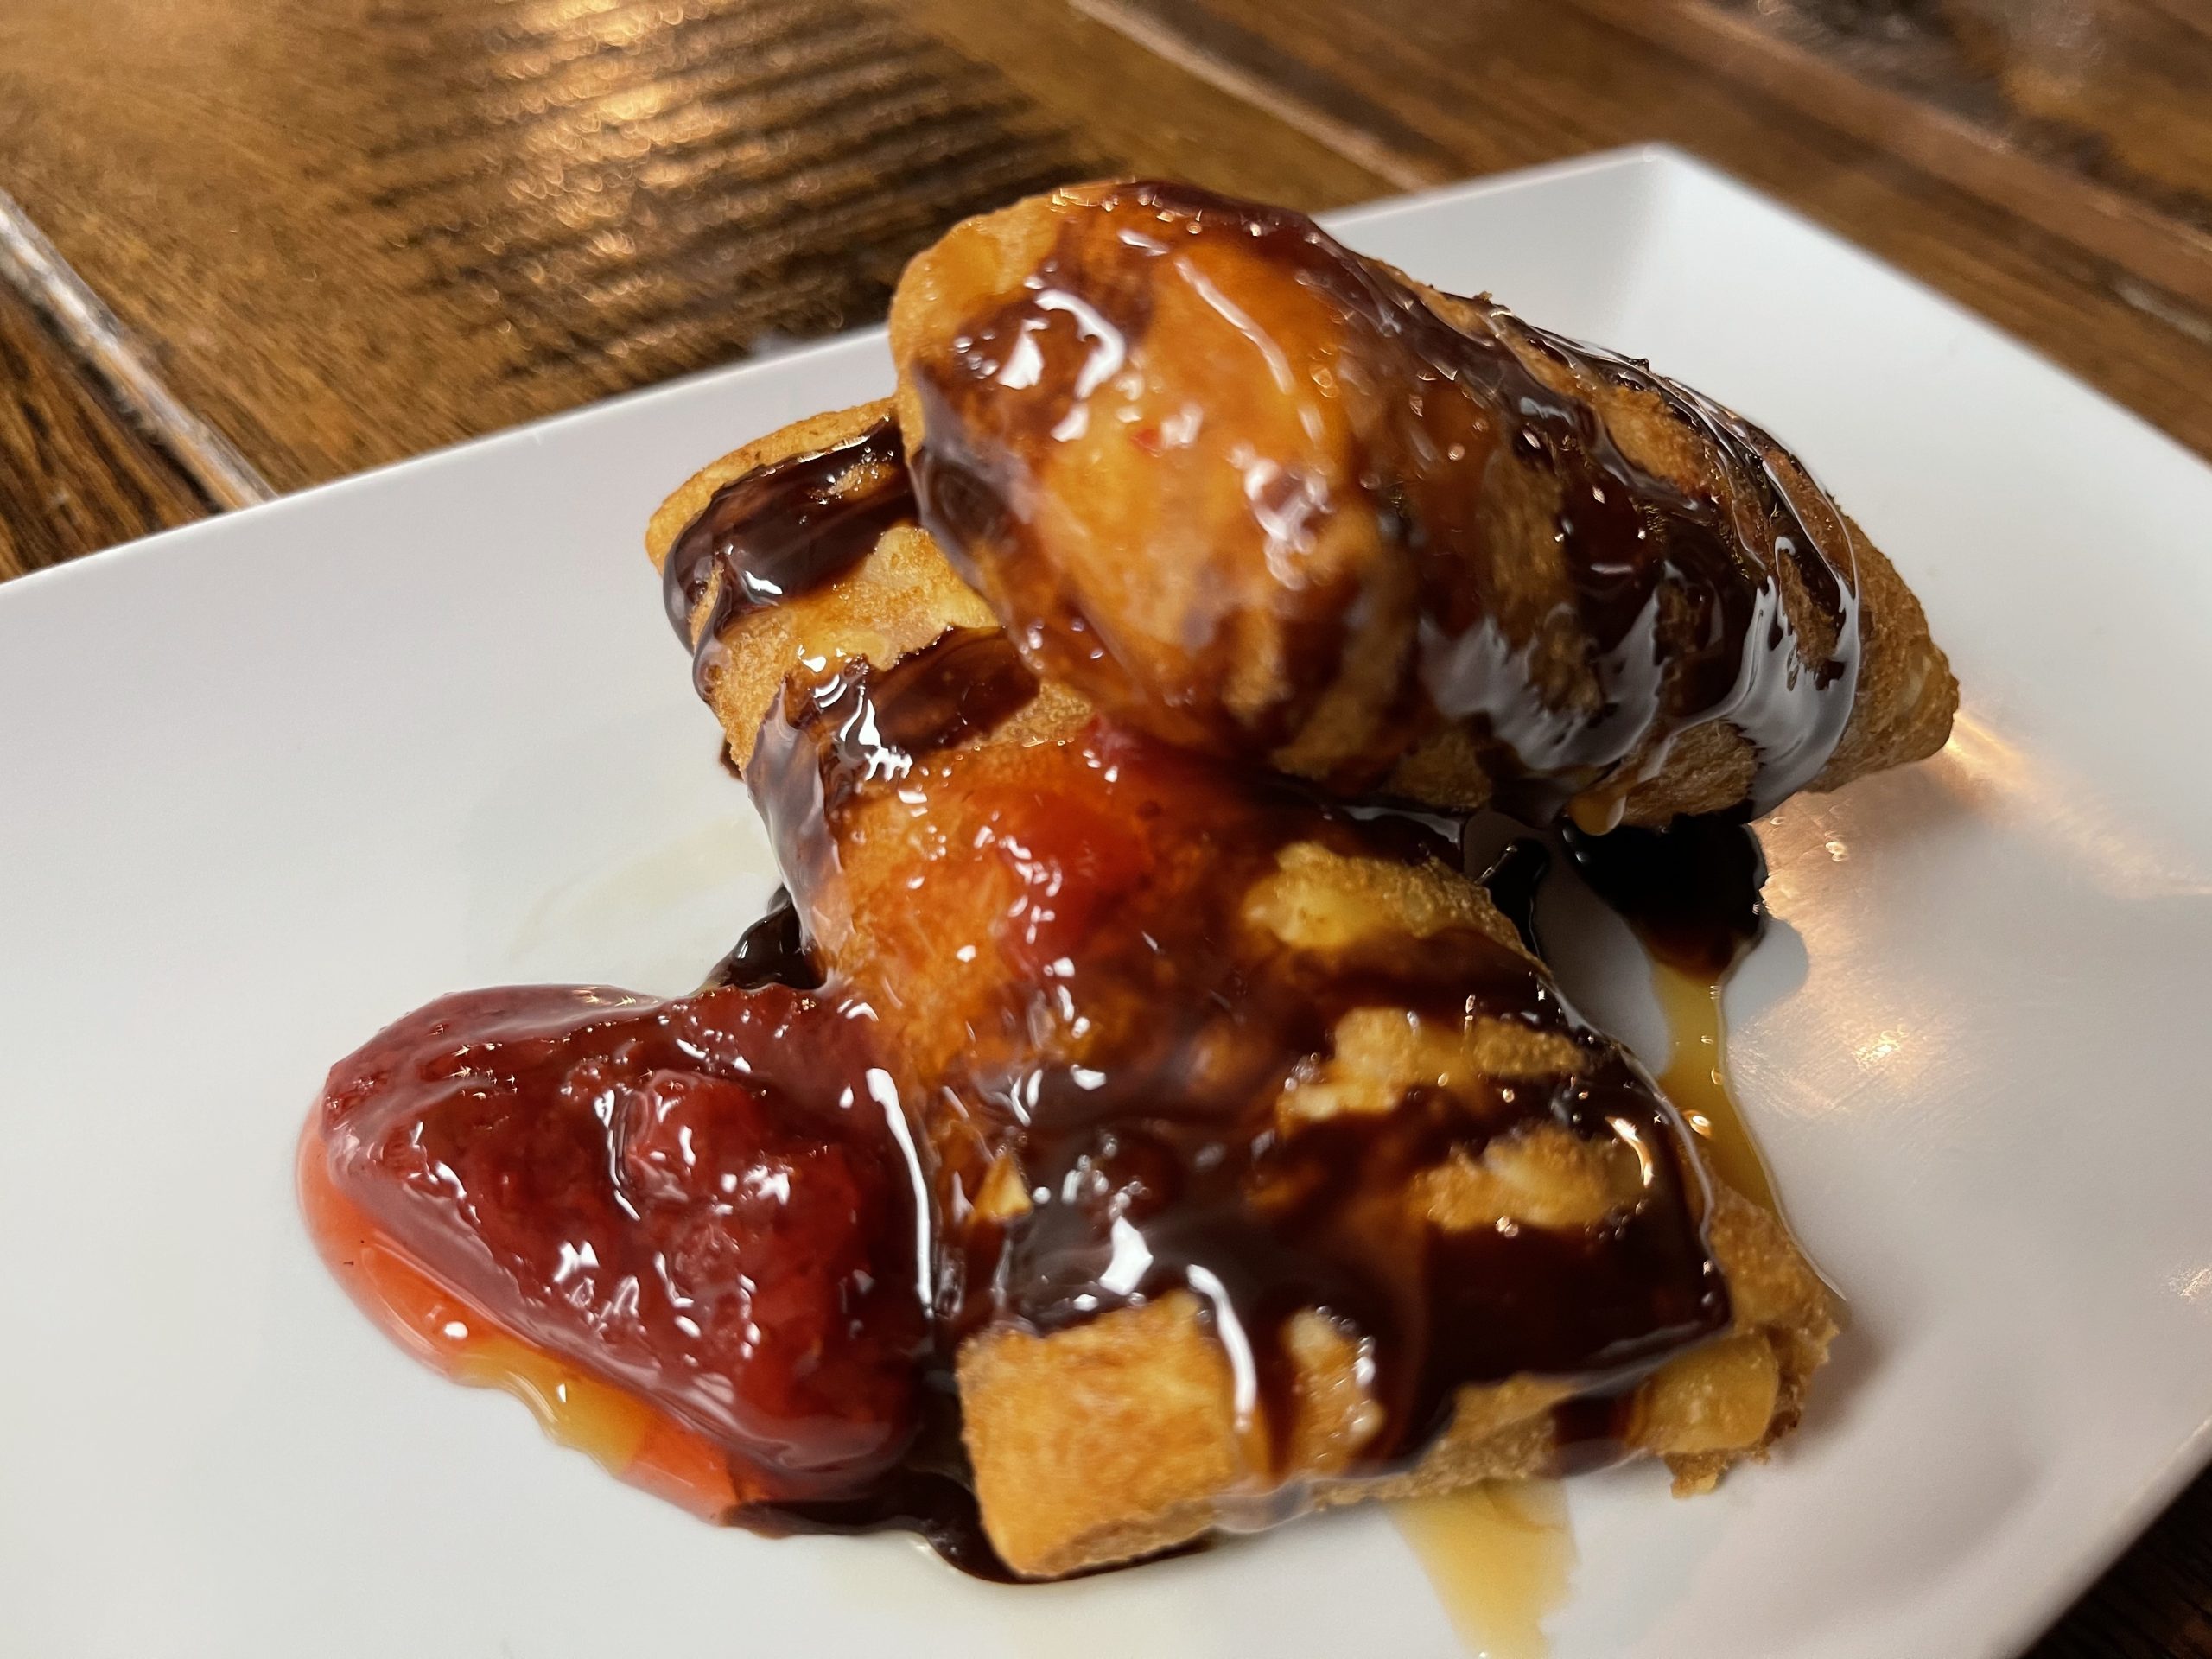 Decadent Raspberry Chimi from Atwater Street Tacos, combining raspberries and cream cheese in a fried tortilla, drizzled with chocolate syrup and caramel, garnished with fresh strawberries, presenting a fusion of classic Mexican flavors with a sweet twist.